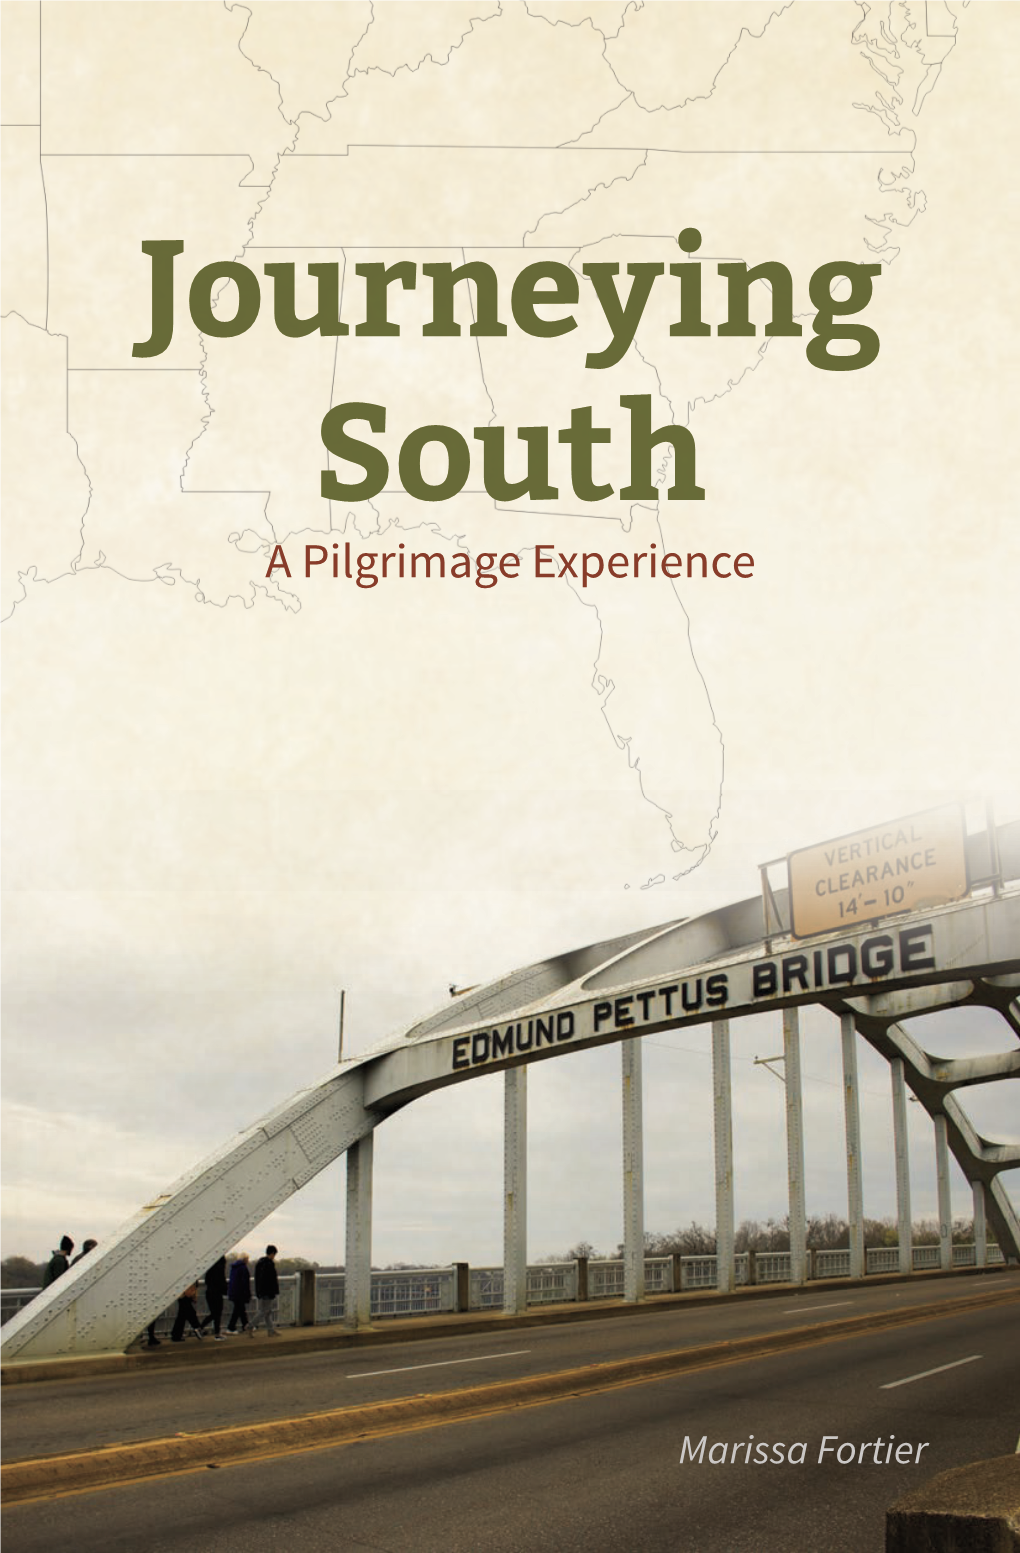 Journeying South – a Pilgrimage Experience